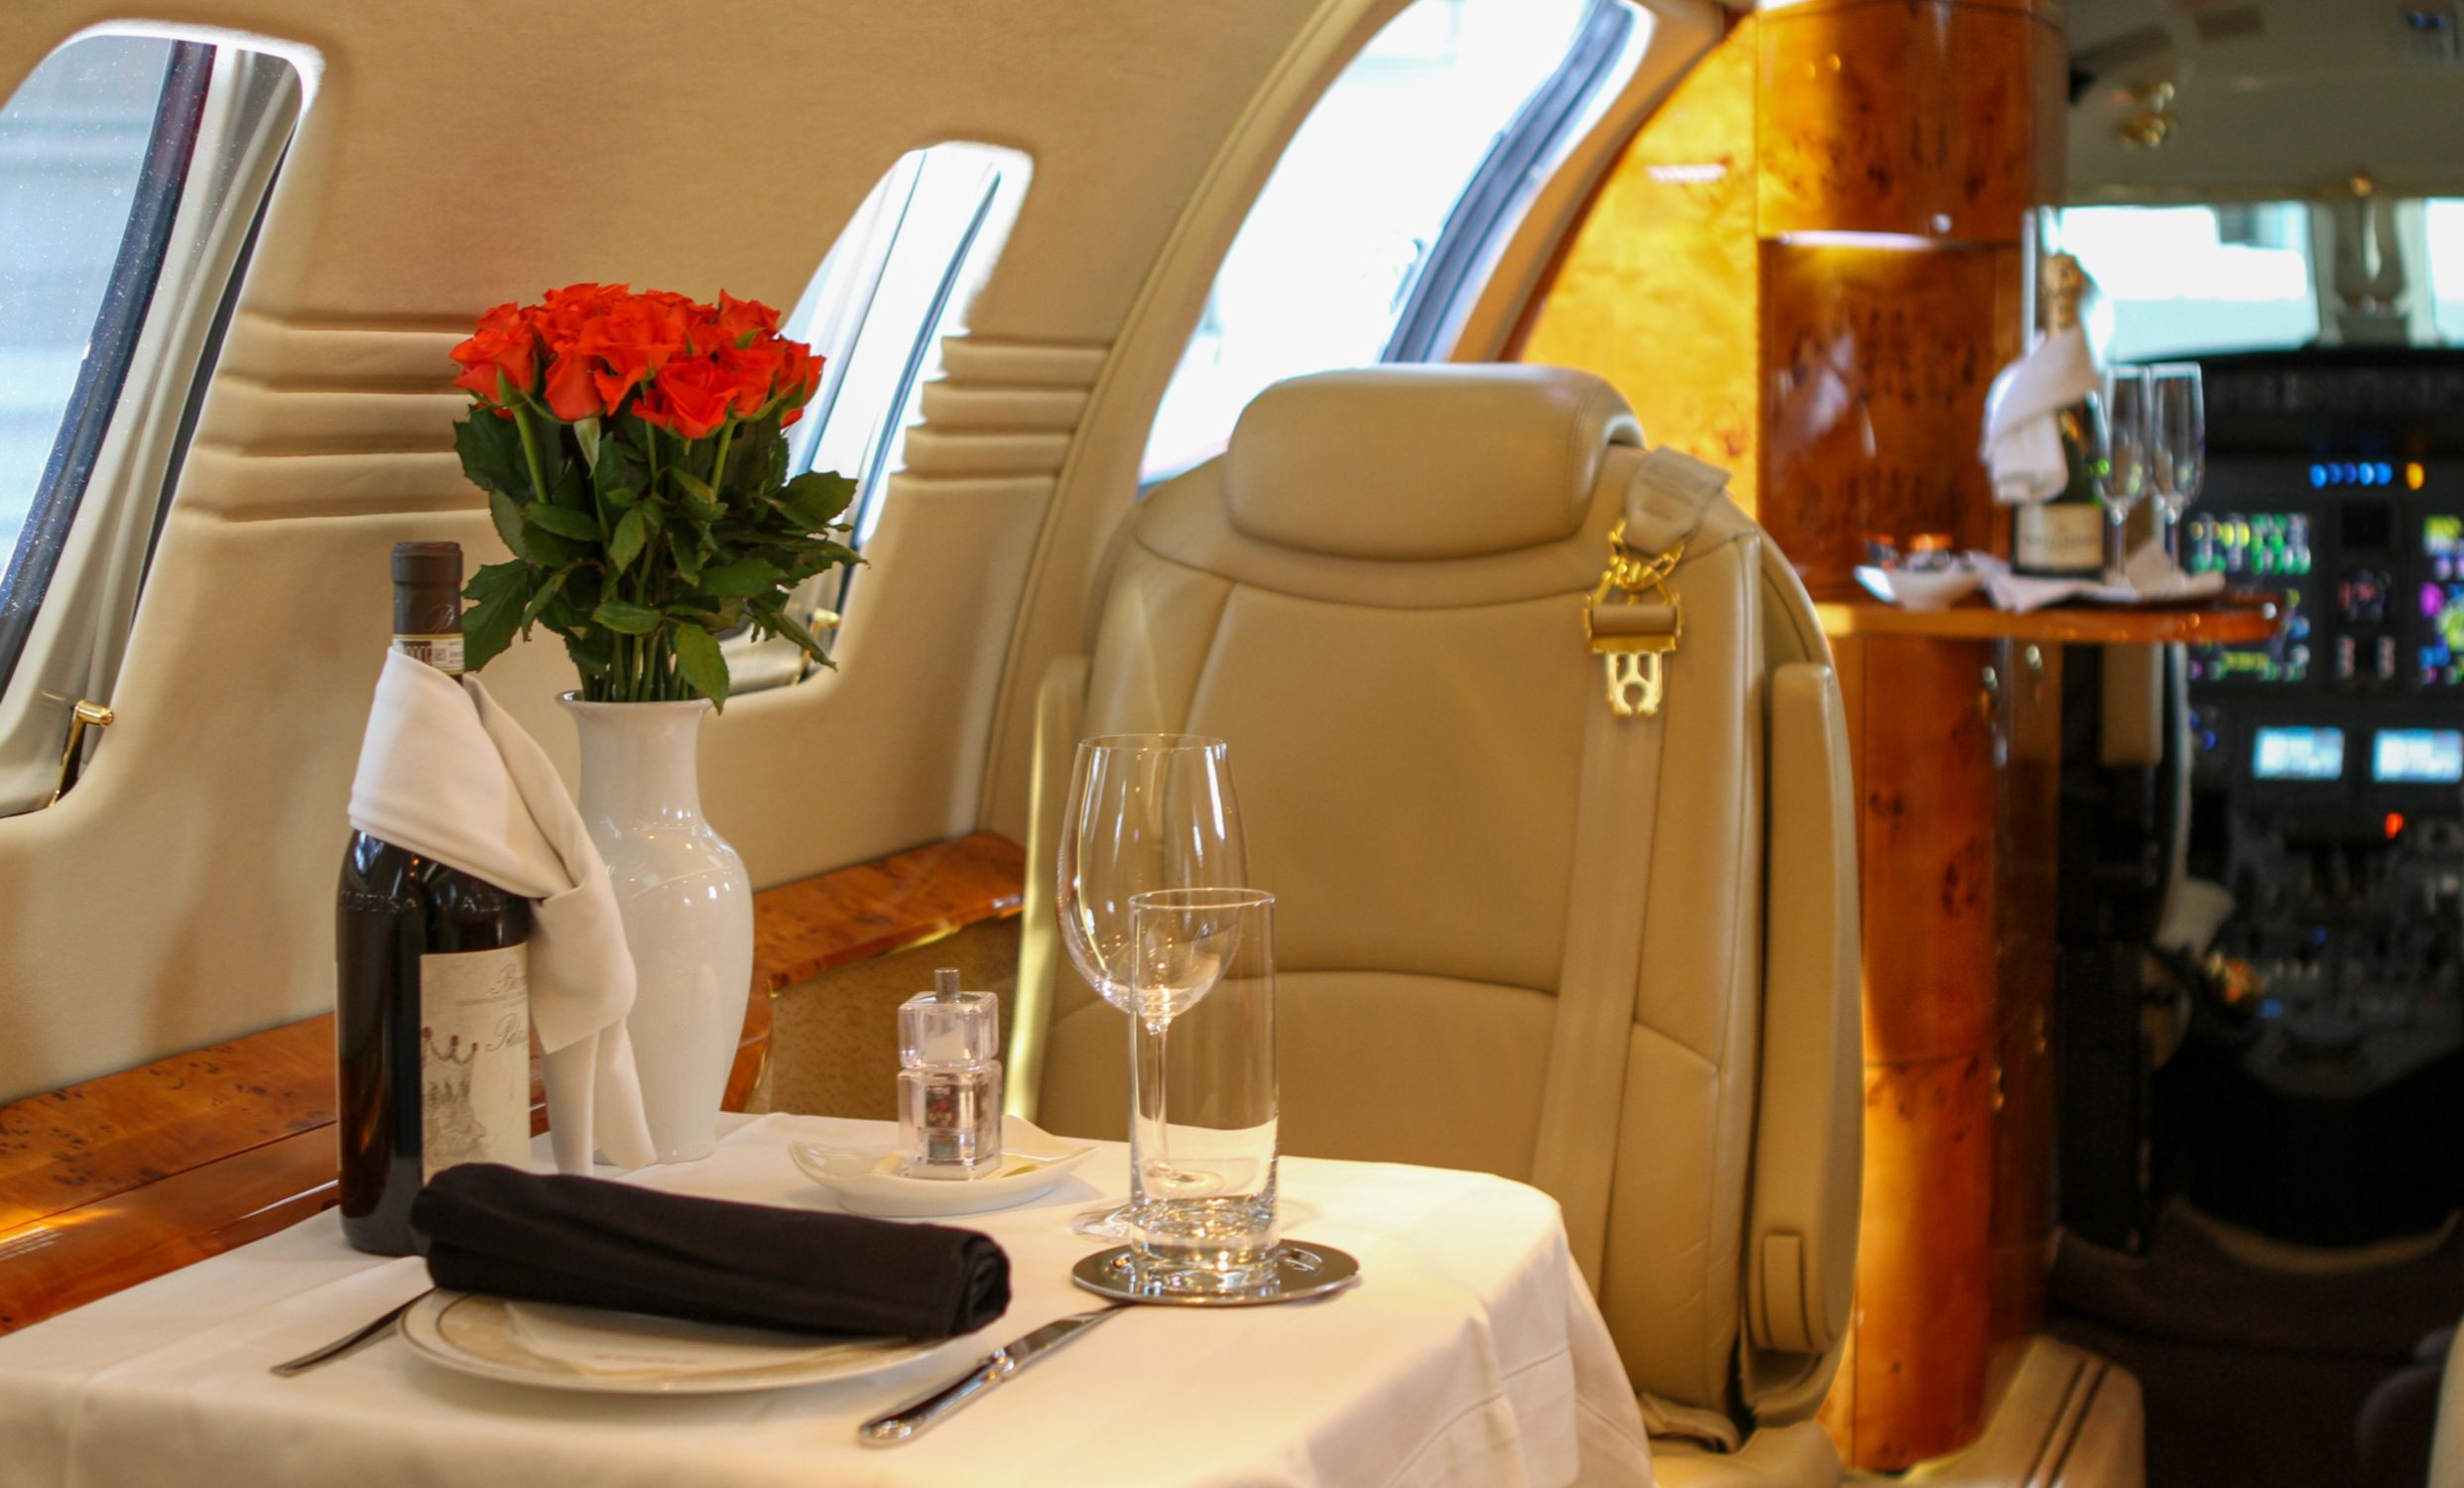 Interior of private jet with table setting